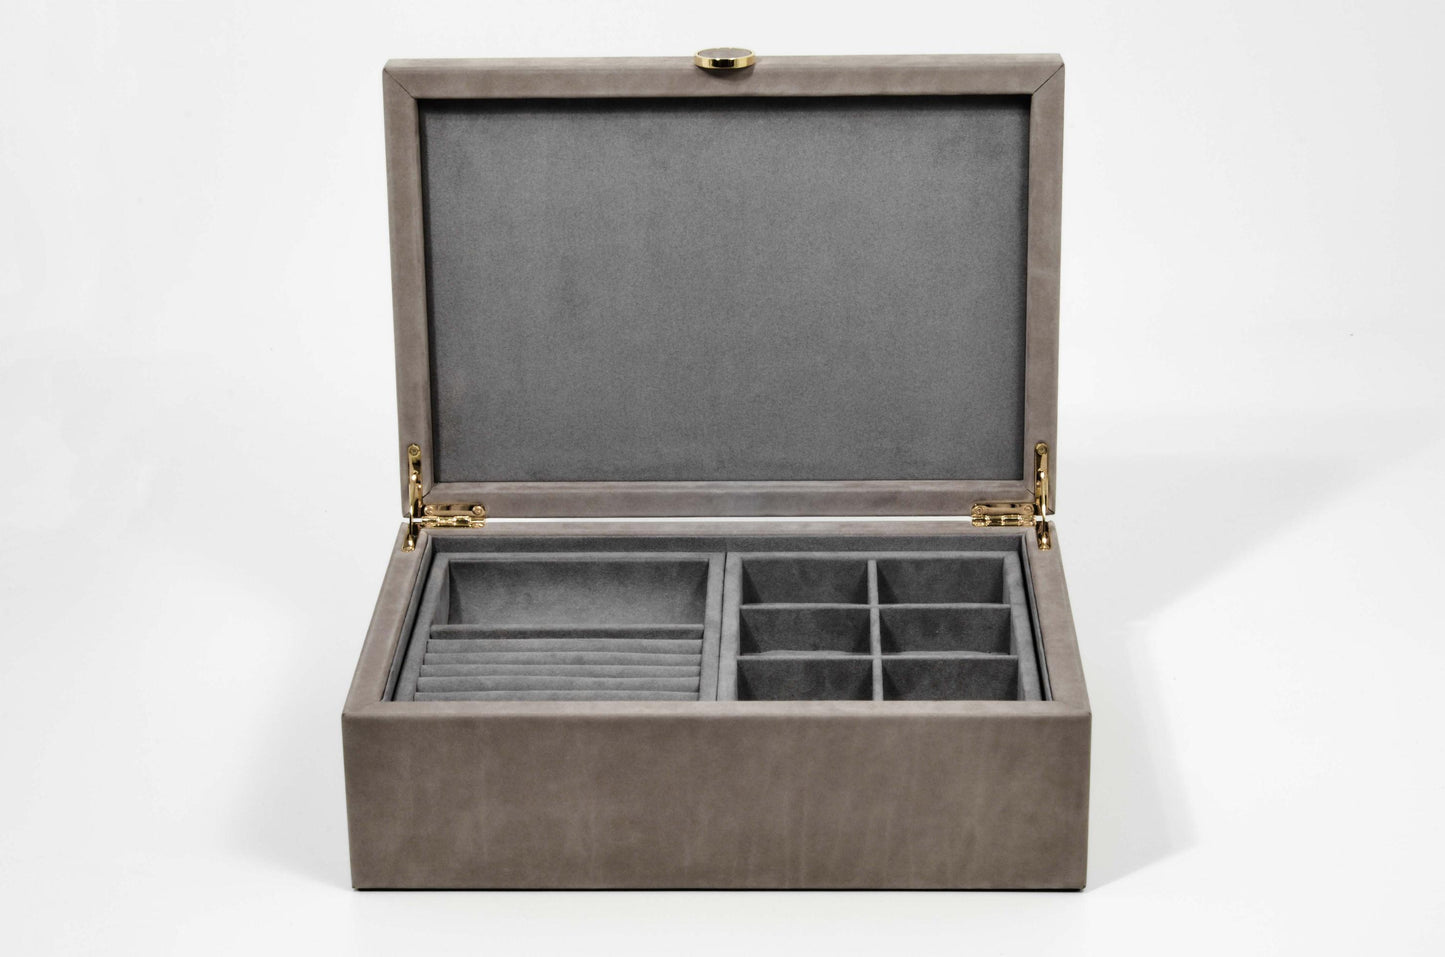 Pinetti Prestige Leather-Covered Wood Jewellery Box with Suede Lining | Stylish Jewelry Storage, Elegant Organizer & Gift Items | 2Jour Concierge, #1 luxury high-end gift & lifestyle shop